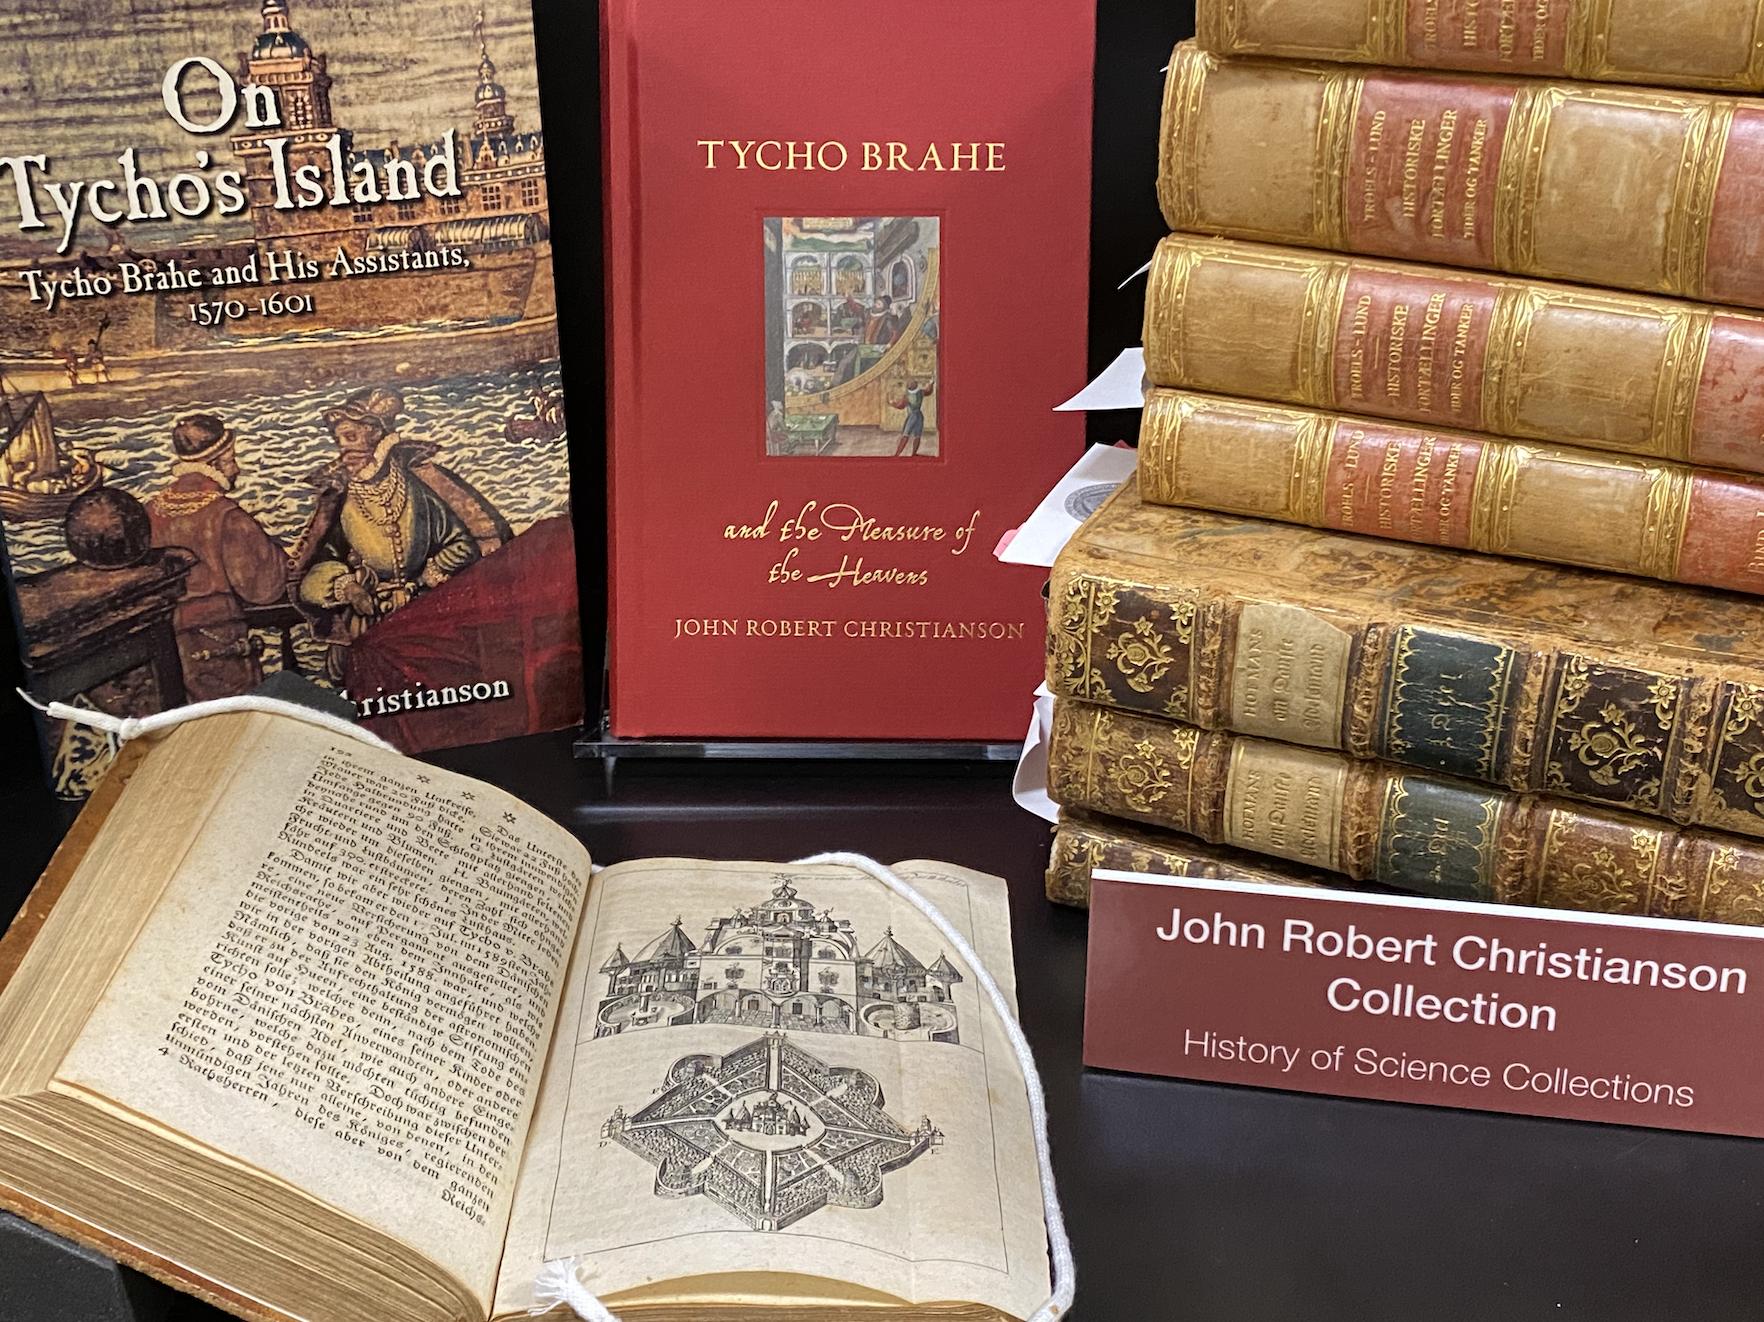 Photo of books on shelf, some with cover, some opened, some stacked (recent works, as we'll as rare books) on the topic of Tycho Brahe